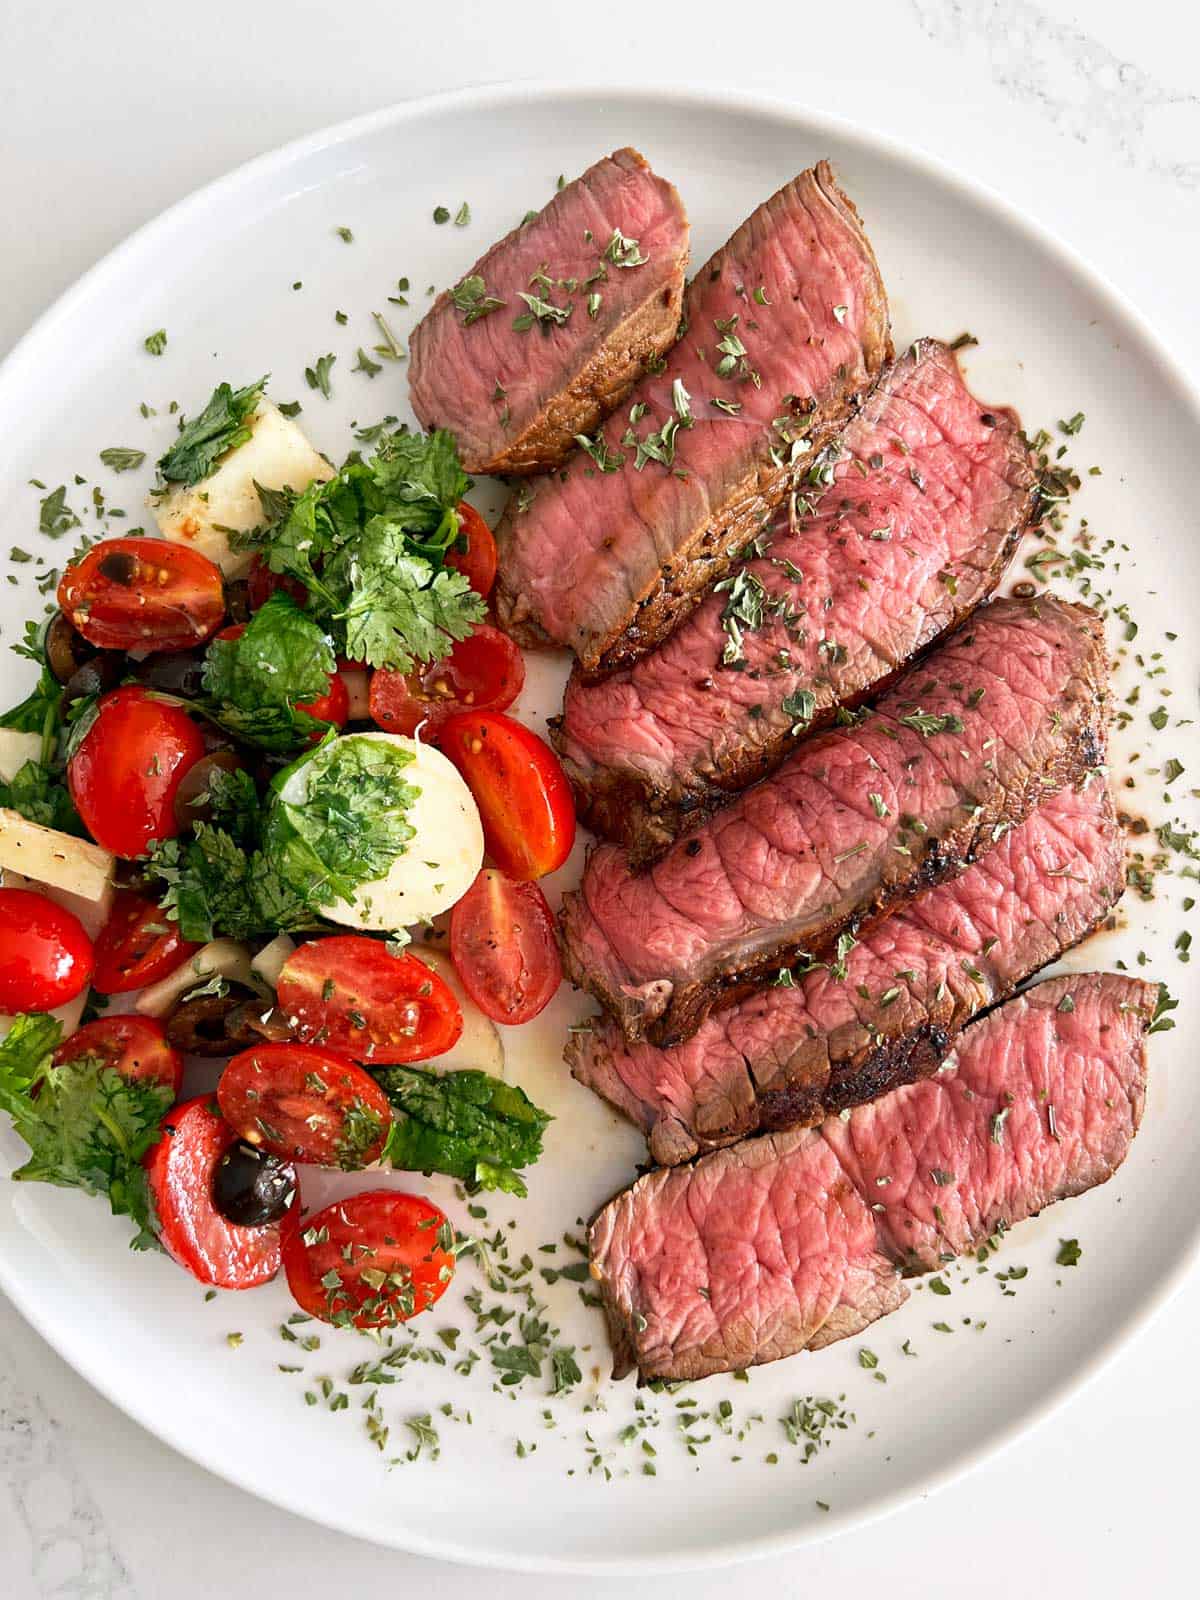 Slices of London Broil are served on a white plate with a side salad.